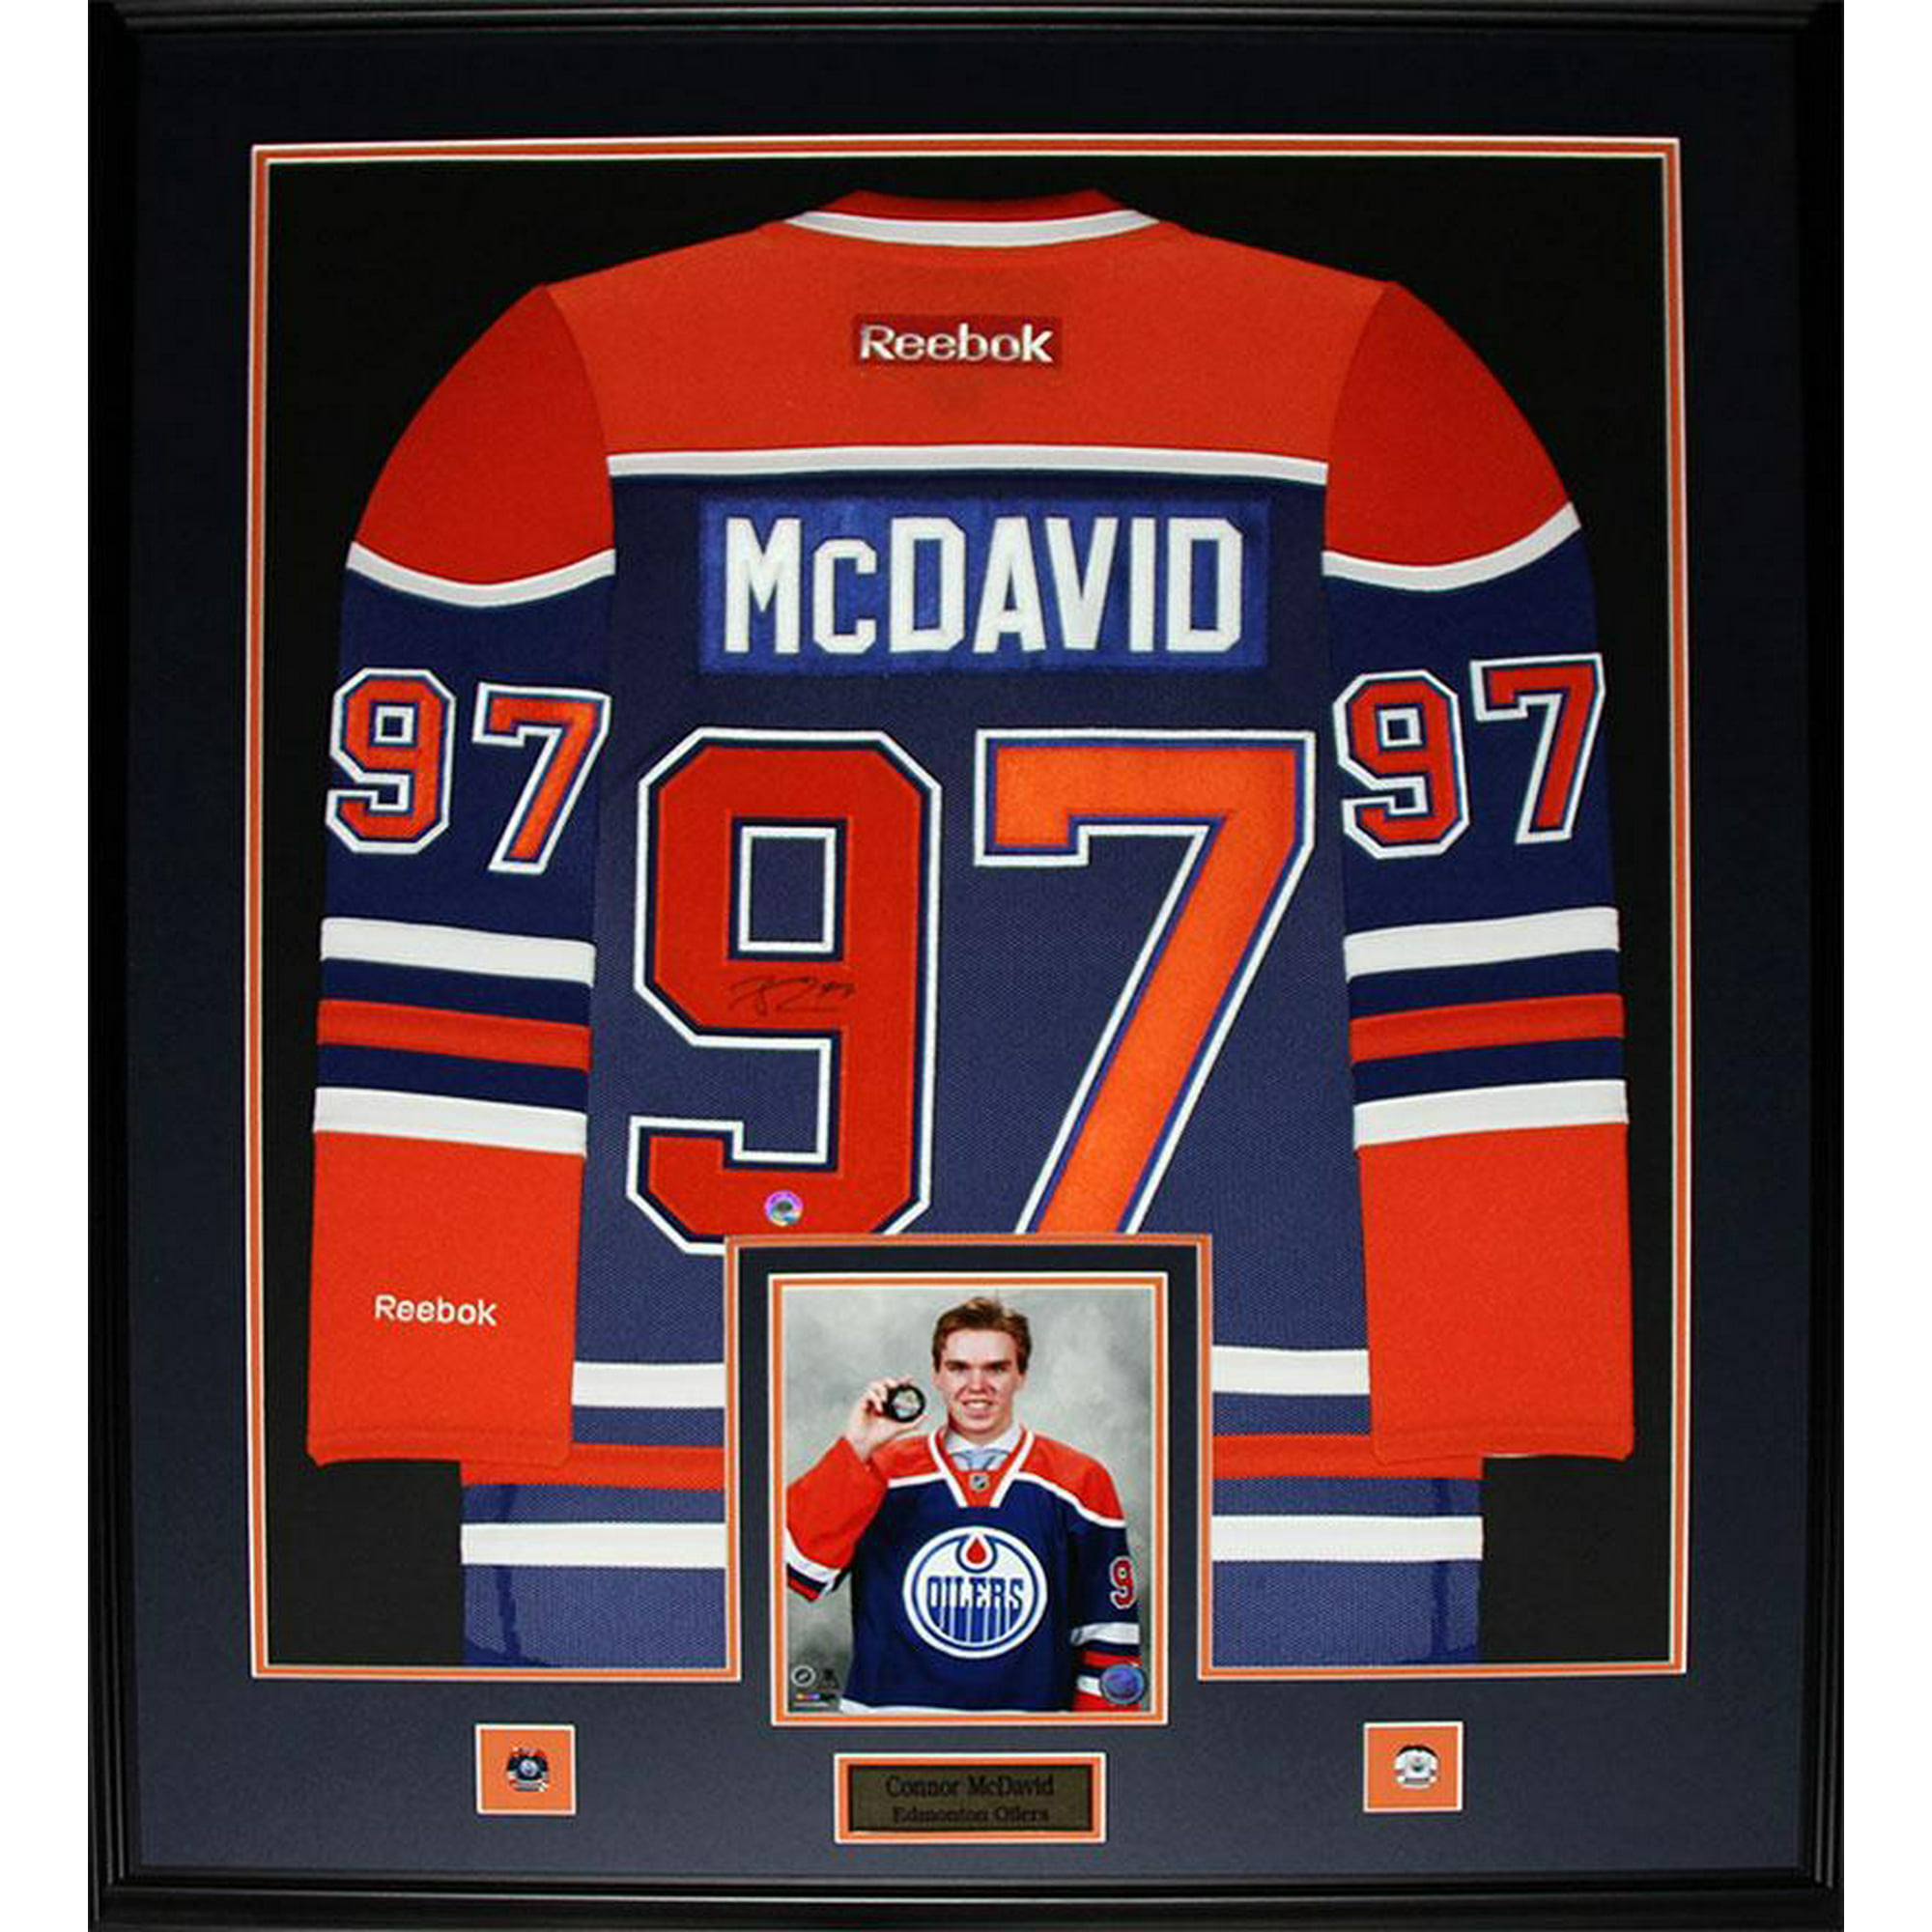 Kitbags & Lockers 12x8 A4 Connor McDavid Edmonton Oilers NHL Autographed  Signed Photo Photograph Picture Frame Ice Hockey Poster Gift Black & White